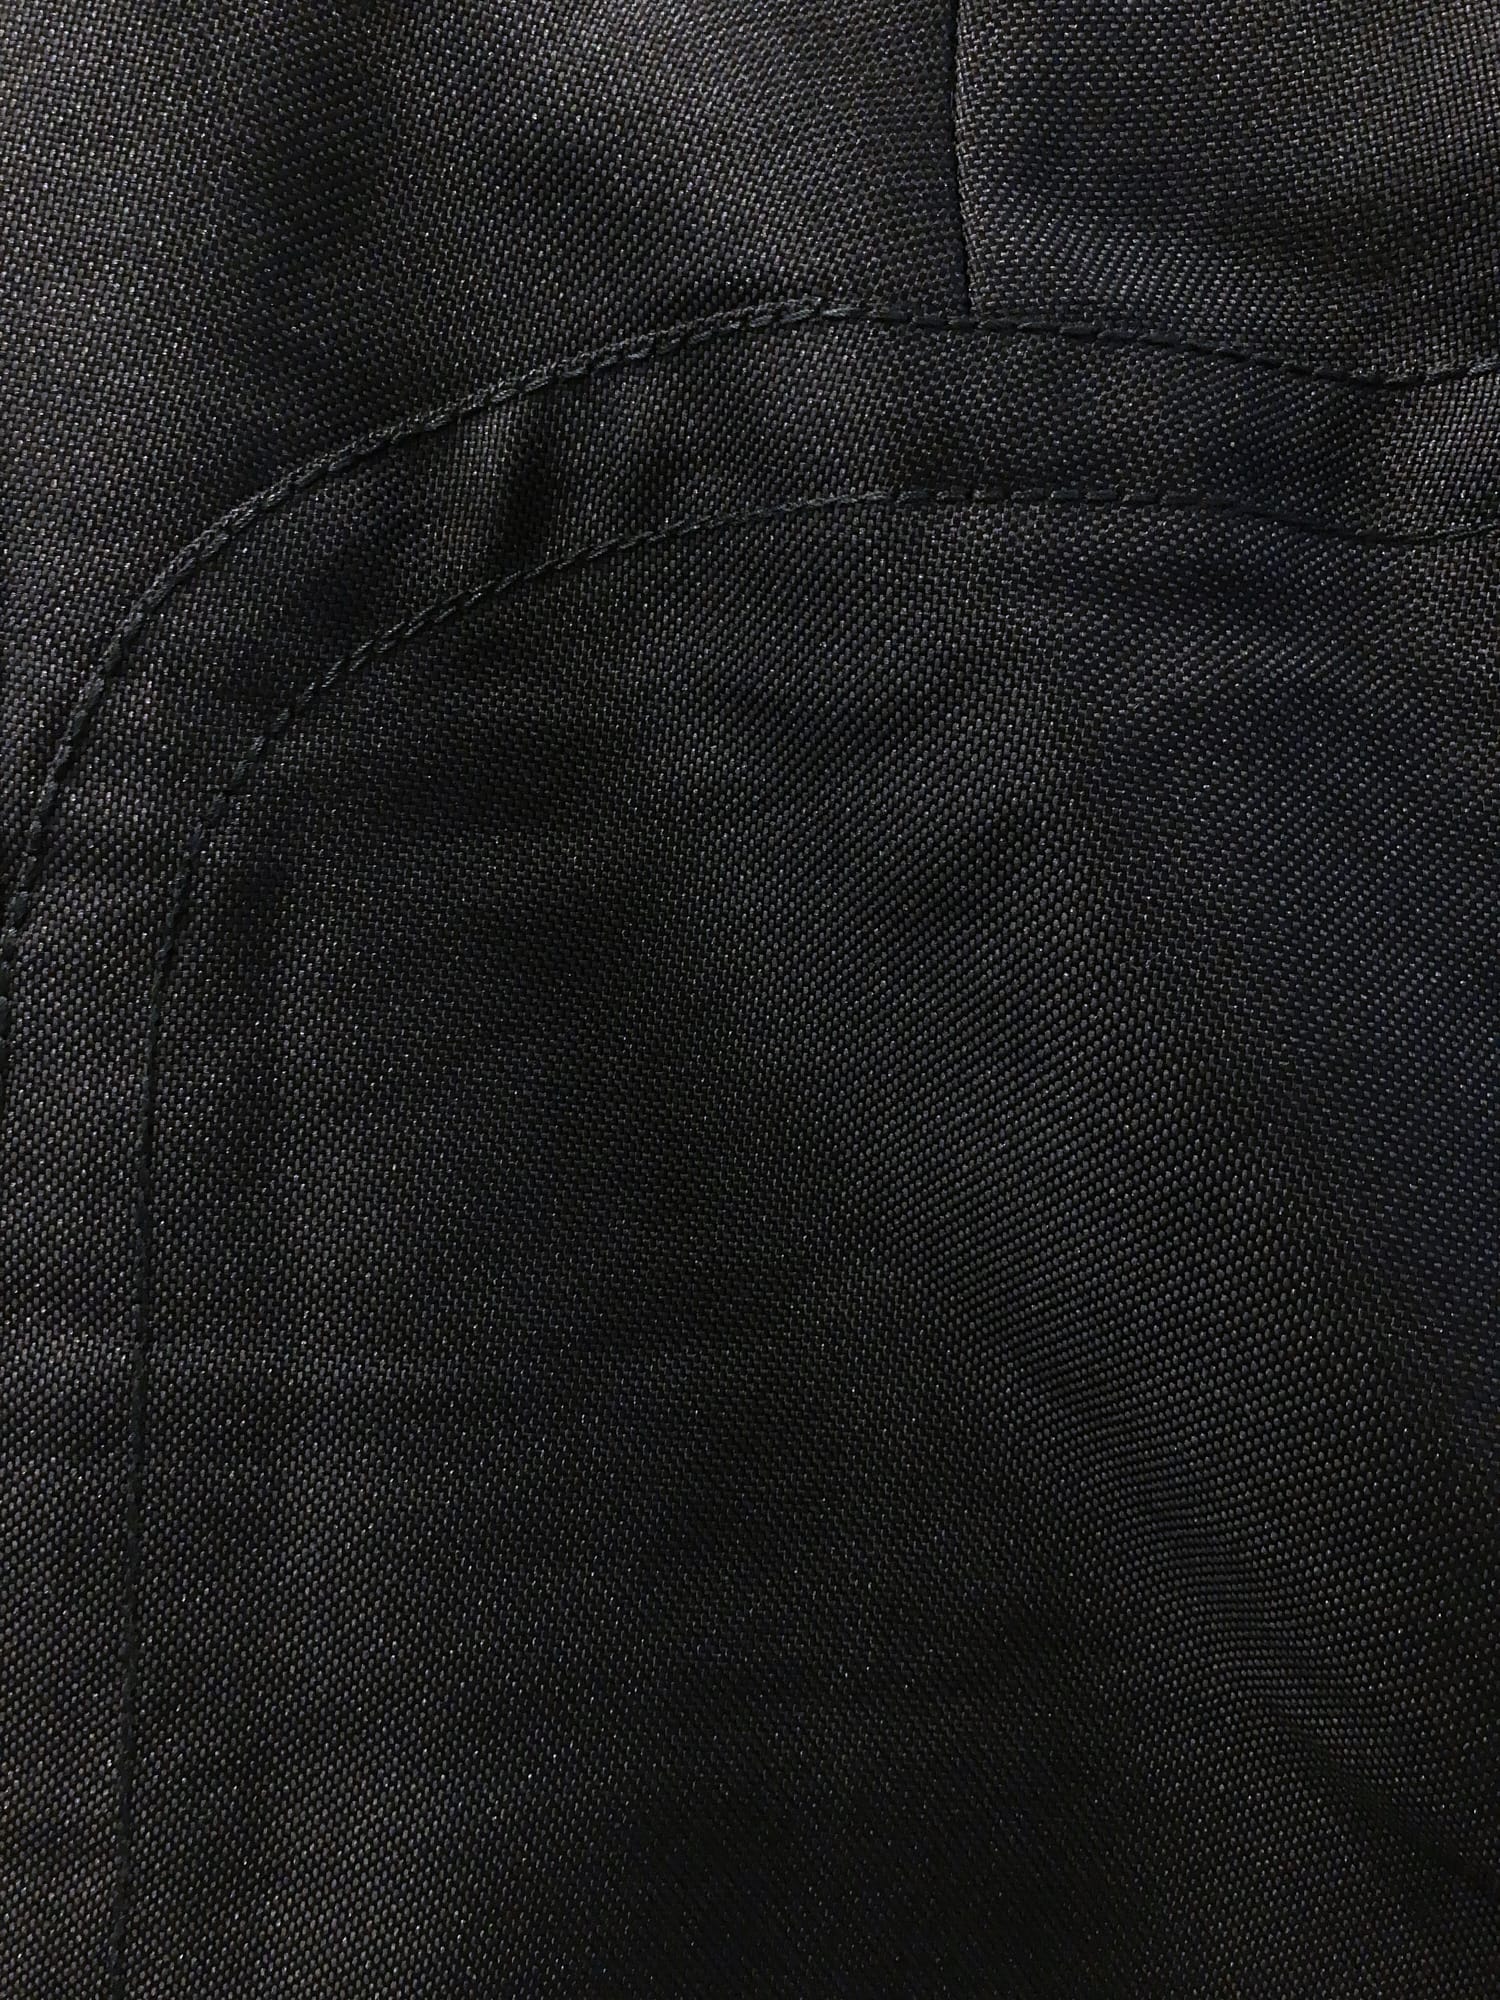 Dirk Bikkembergs 1990s 2000s black polyester canvas tapered trousers